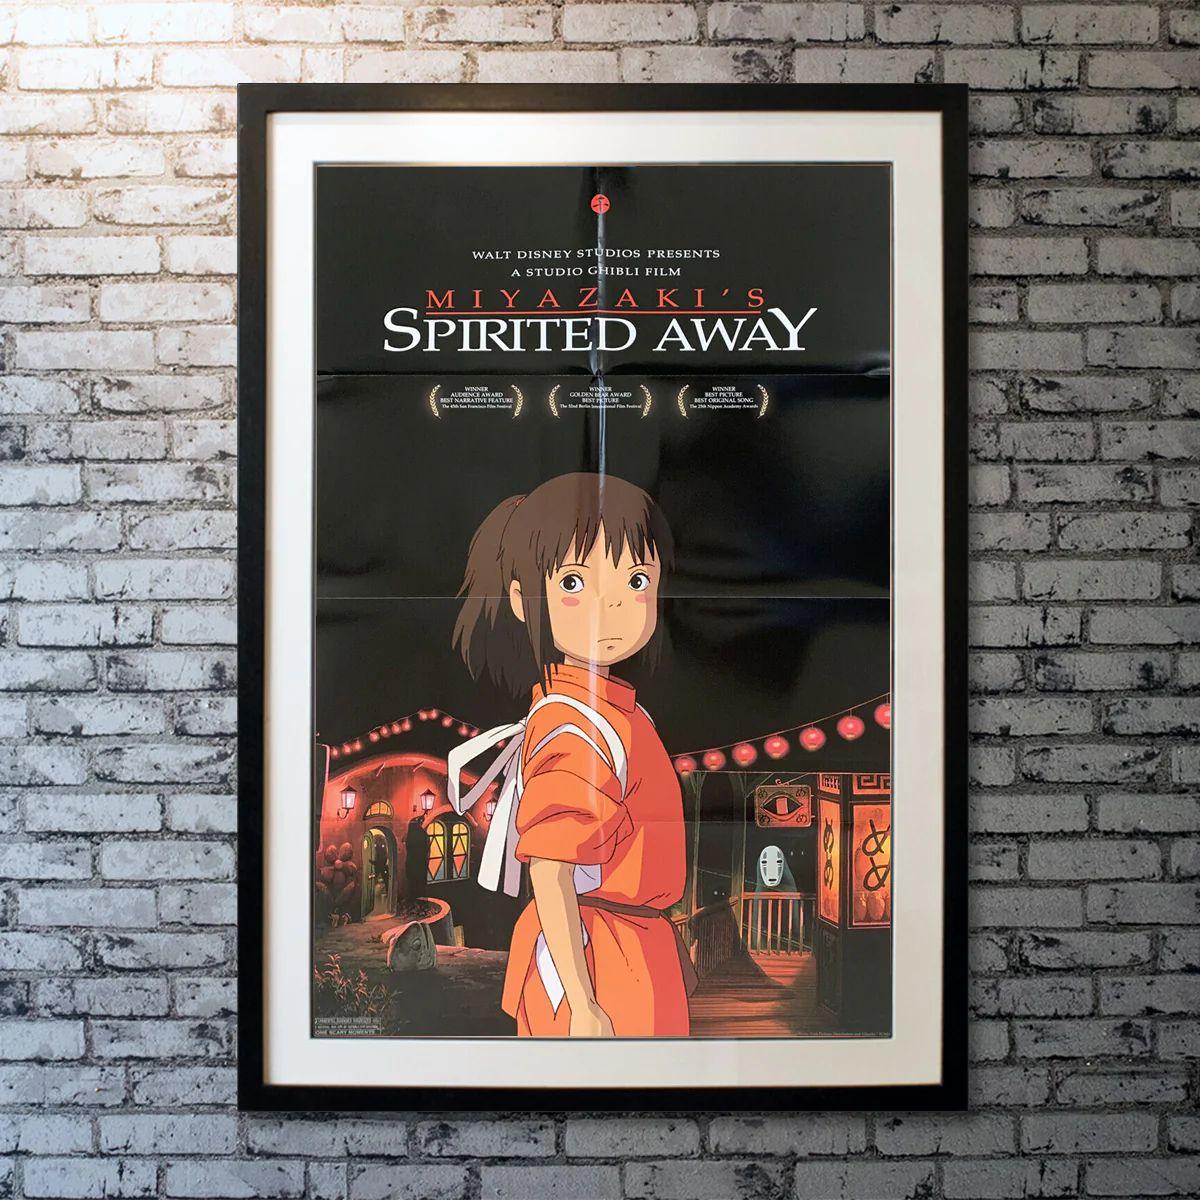 Spirited Away, Unframed Poster, 2001

Original One Sheet (27 X 40 Inches). During her family's move to the suburbs, a sullen 10-year-old girl wanders into a world ruled by gods, witches, and spirits, and where humans are changed into